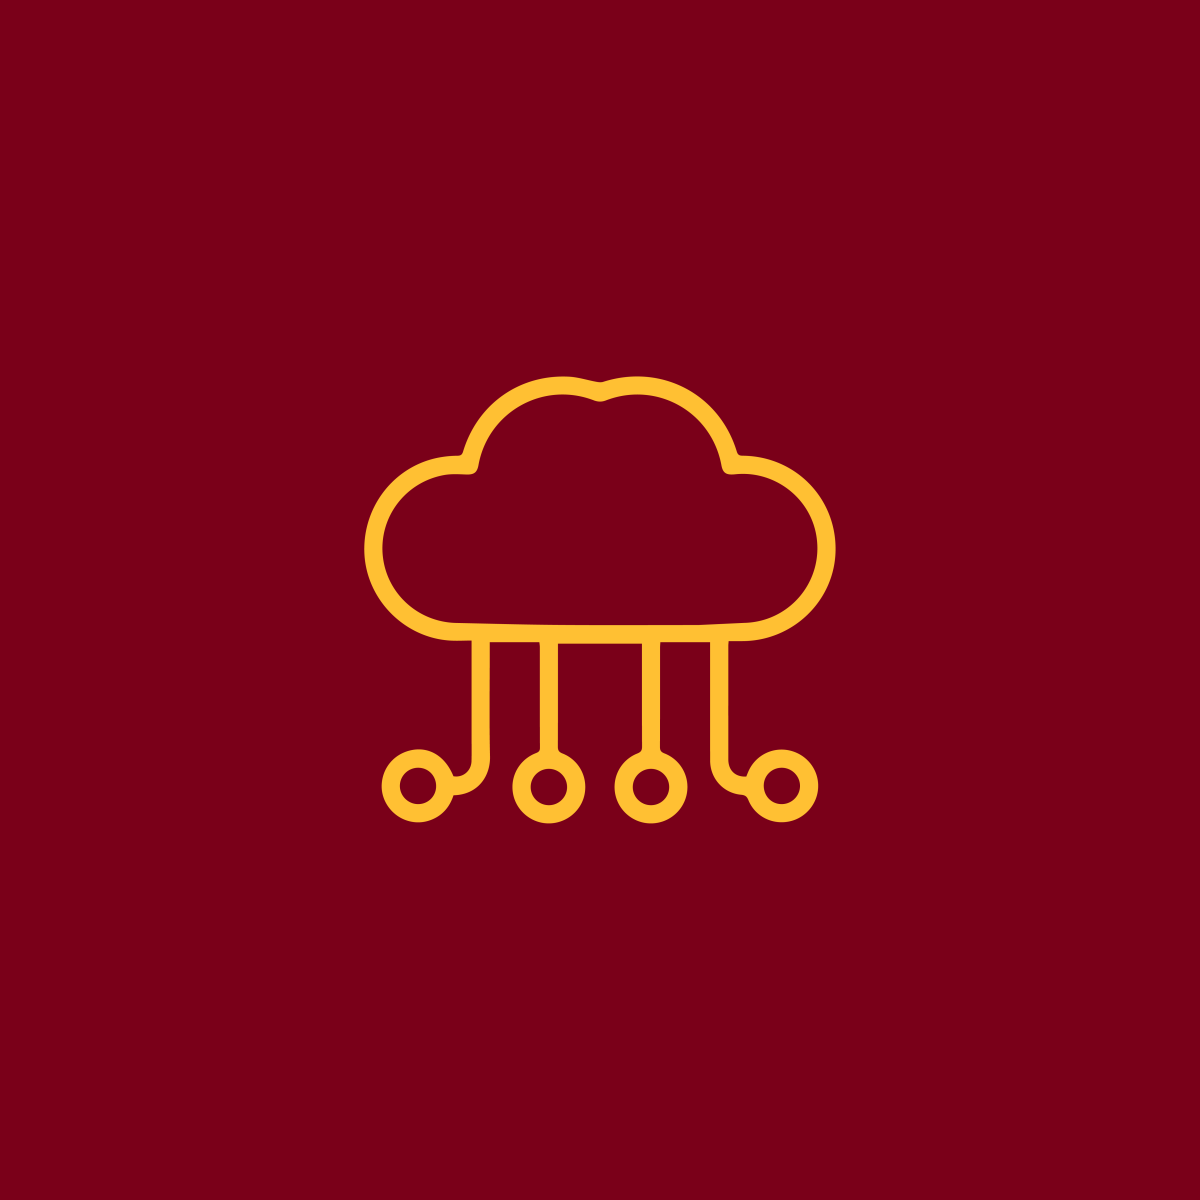 icon with cloud